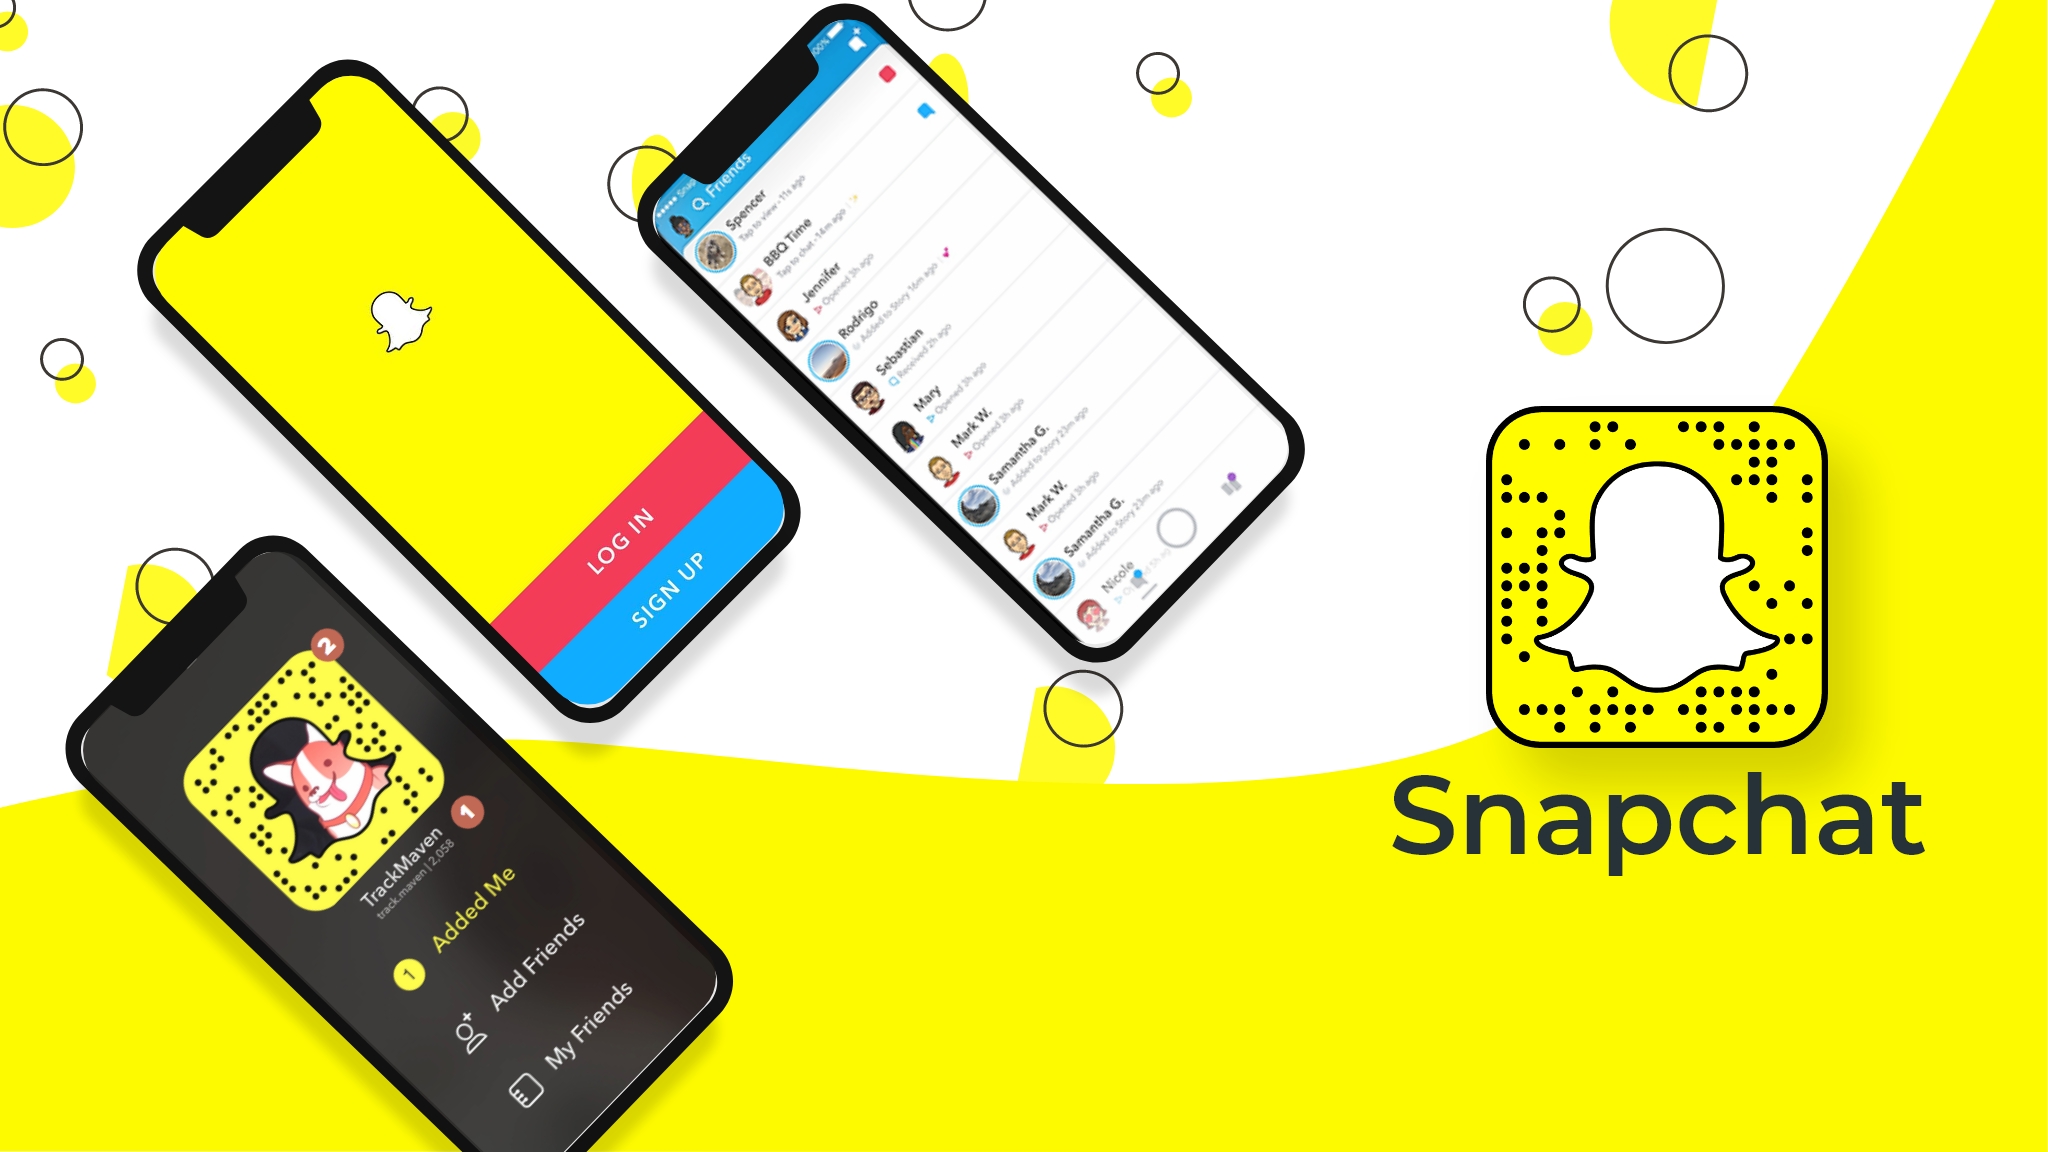 How Does An App Like Snapchat Function in The Marketplace & Cost Estimation